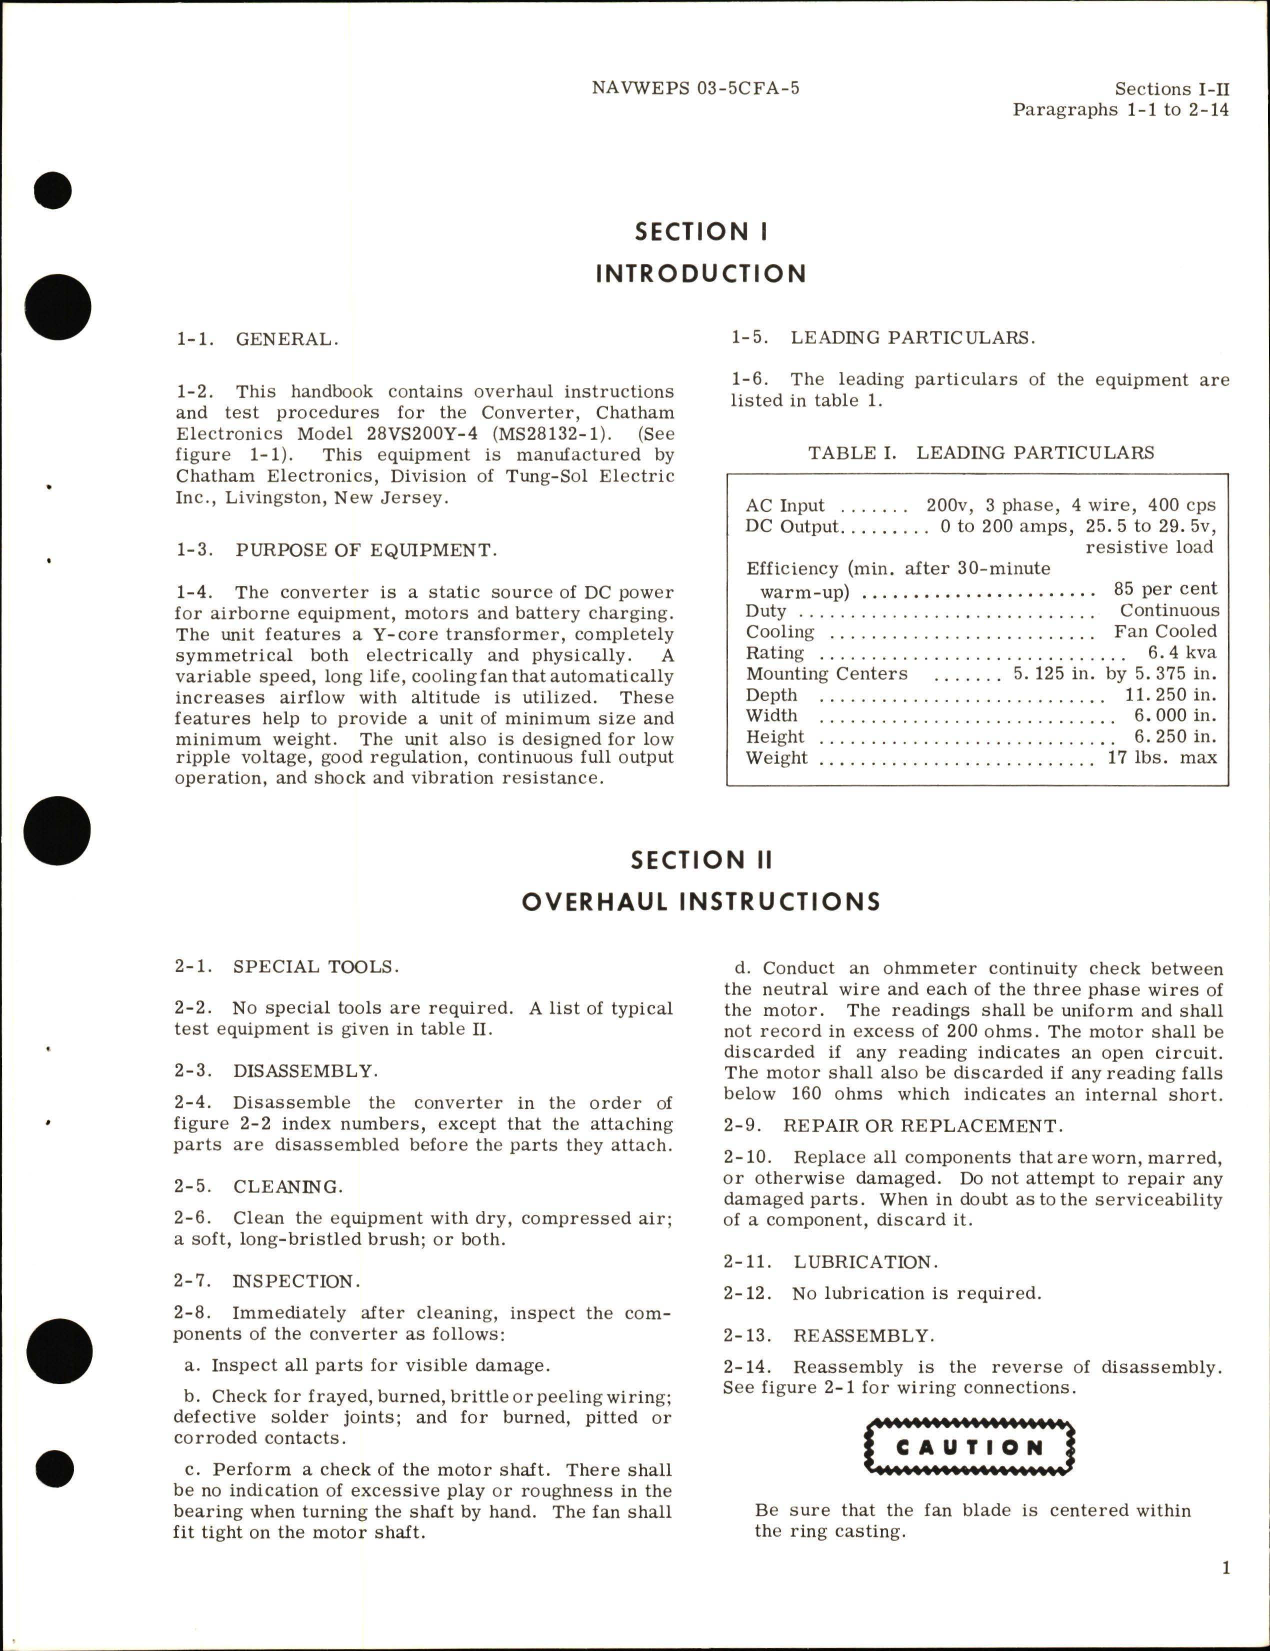 Sample page 5 from AirCorps Library document: Overhaul Instructions for Class A Converter, 200 Ampere - Part 28VS200Y-4 - Type MS28132-1 